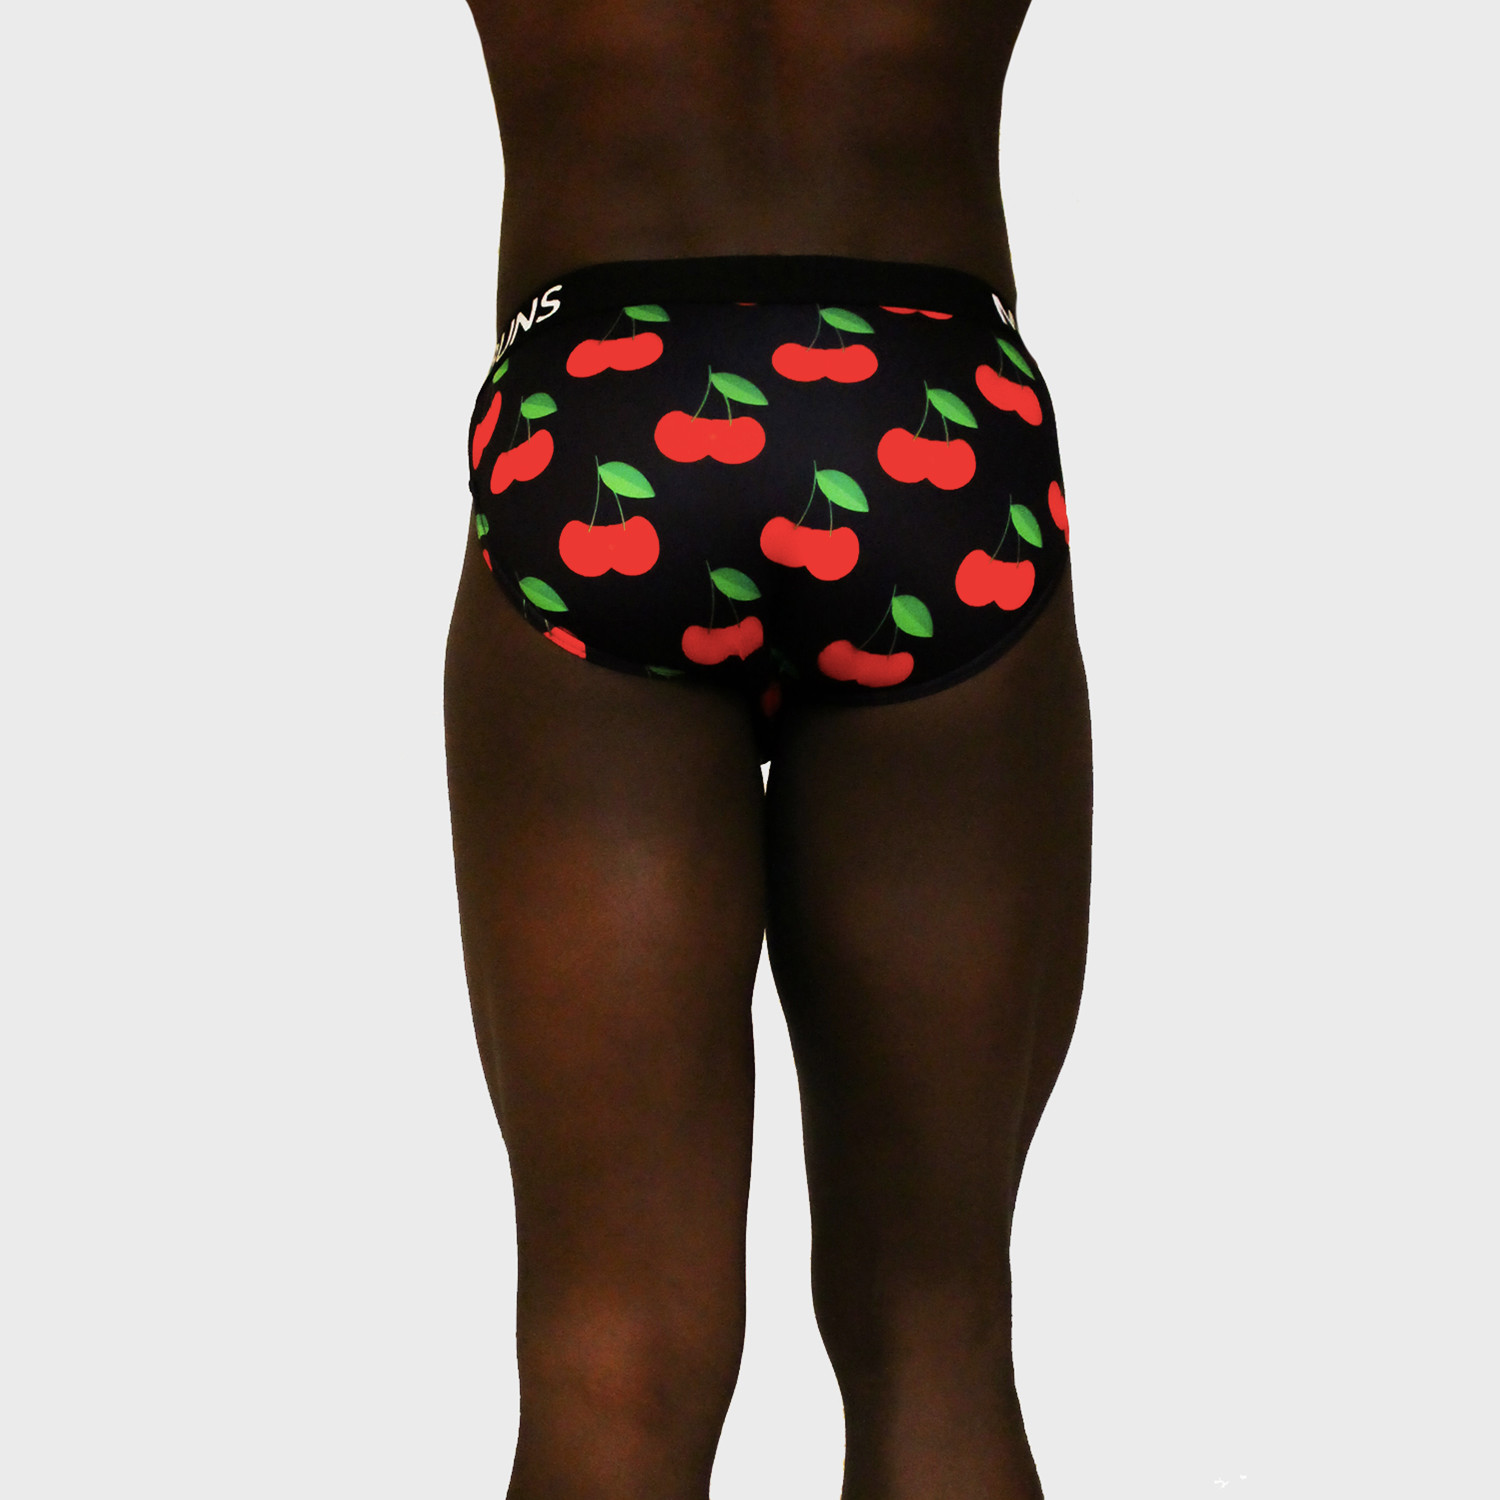 Cherry Bombs + Peachy Peaches // 2-Pack Briefs // Multicolor (Large) -  MANBUNS - Touch of Modern